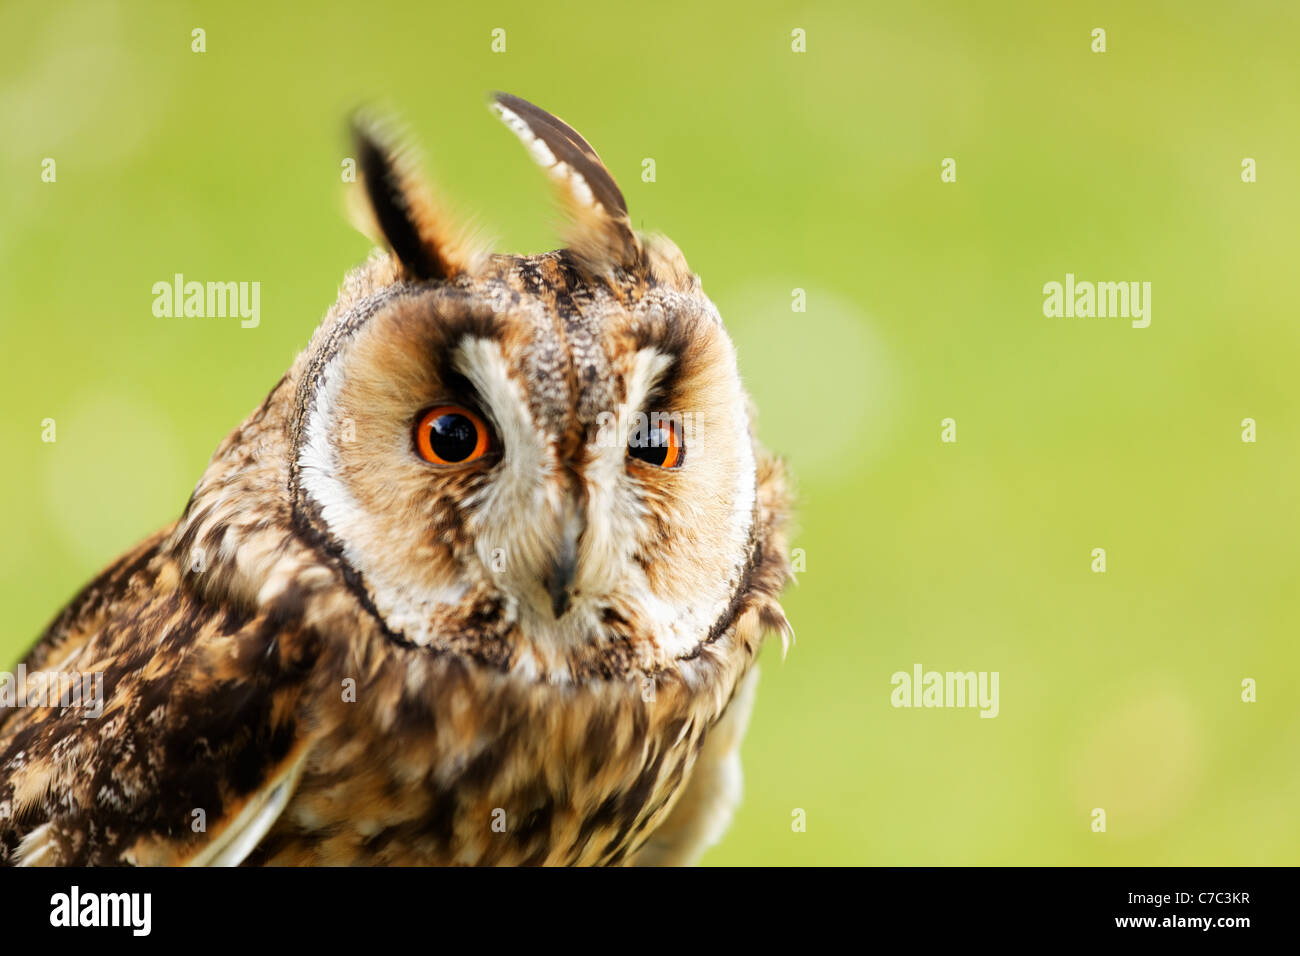 Captive long-eared owl on display at Glenveagh Castle, Glenveagh National Park, County Donegal, Republic of Ireland Stock Photo